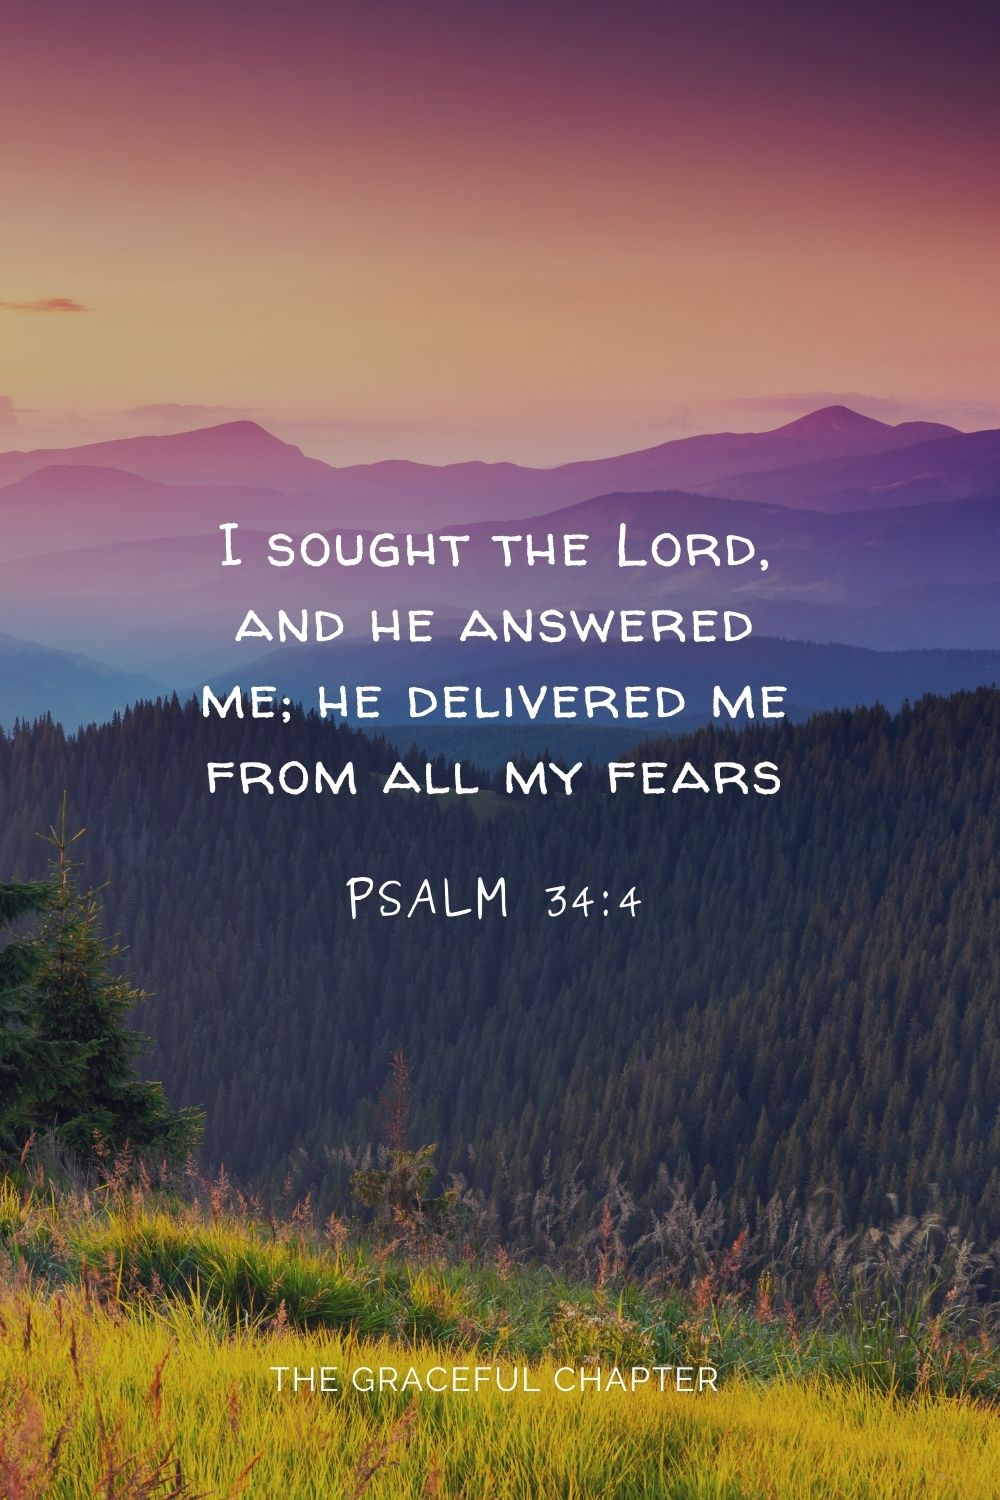 I sought the Lord, and he answered me; he delivered me from all my fears .Psalm 34:4